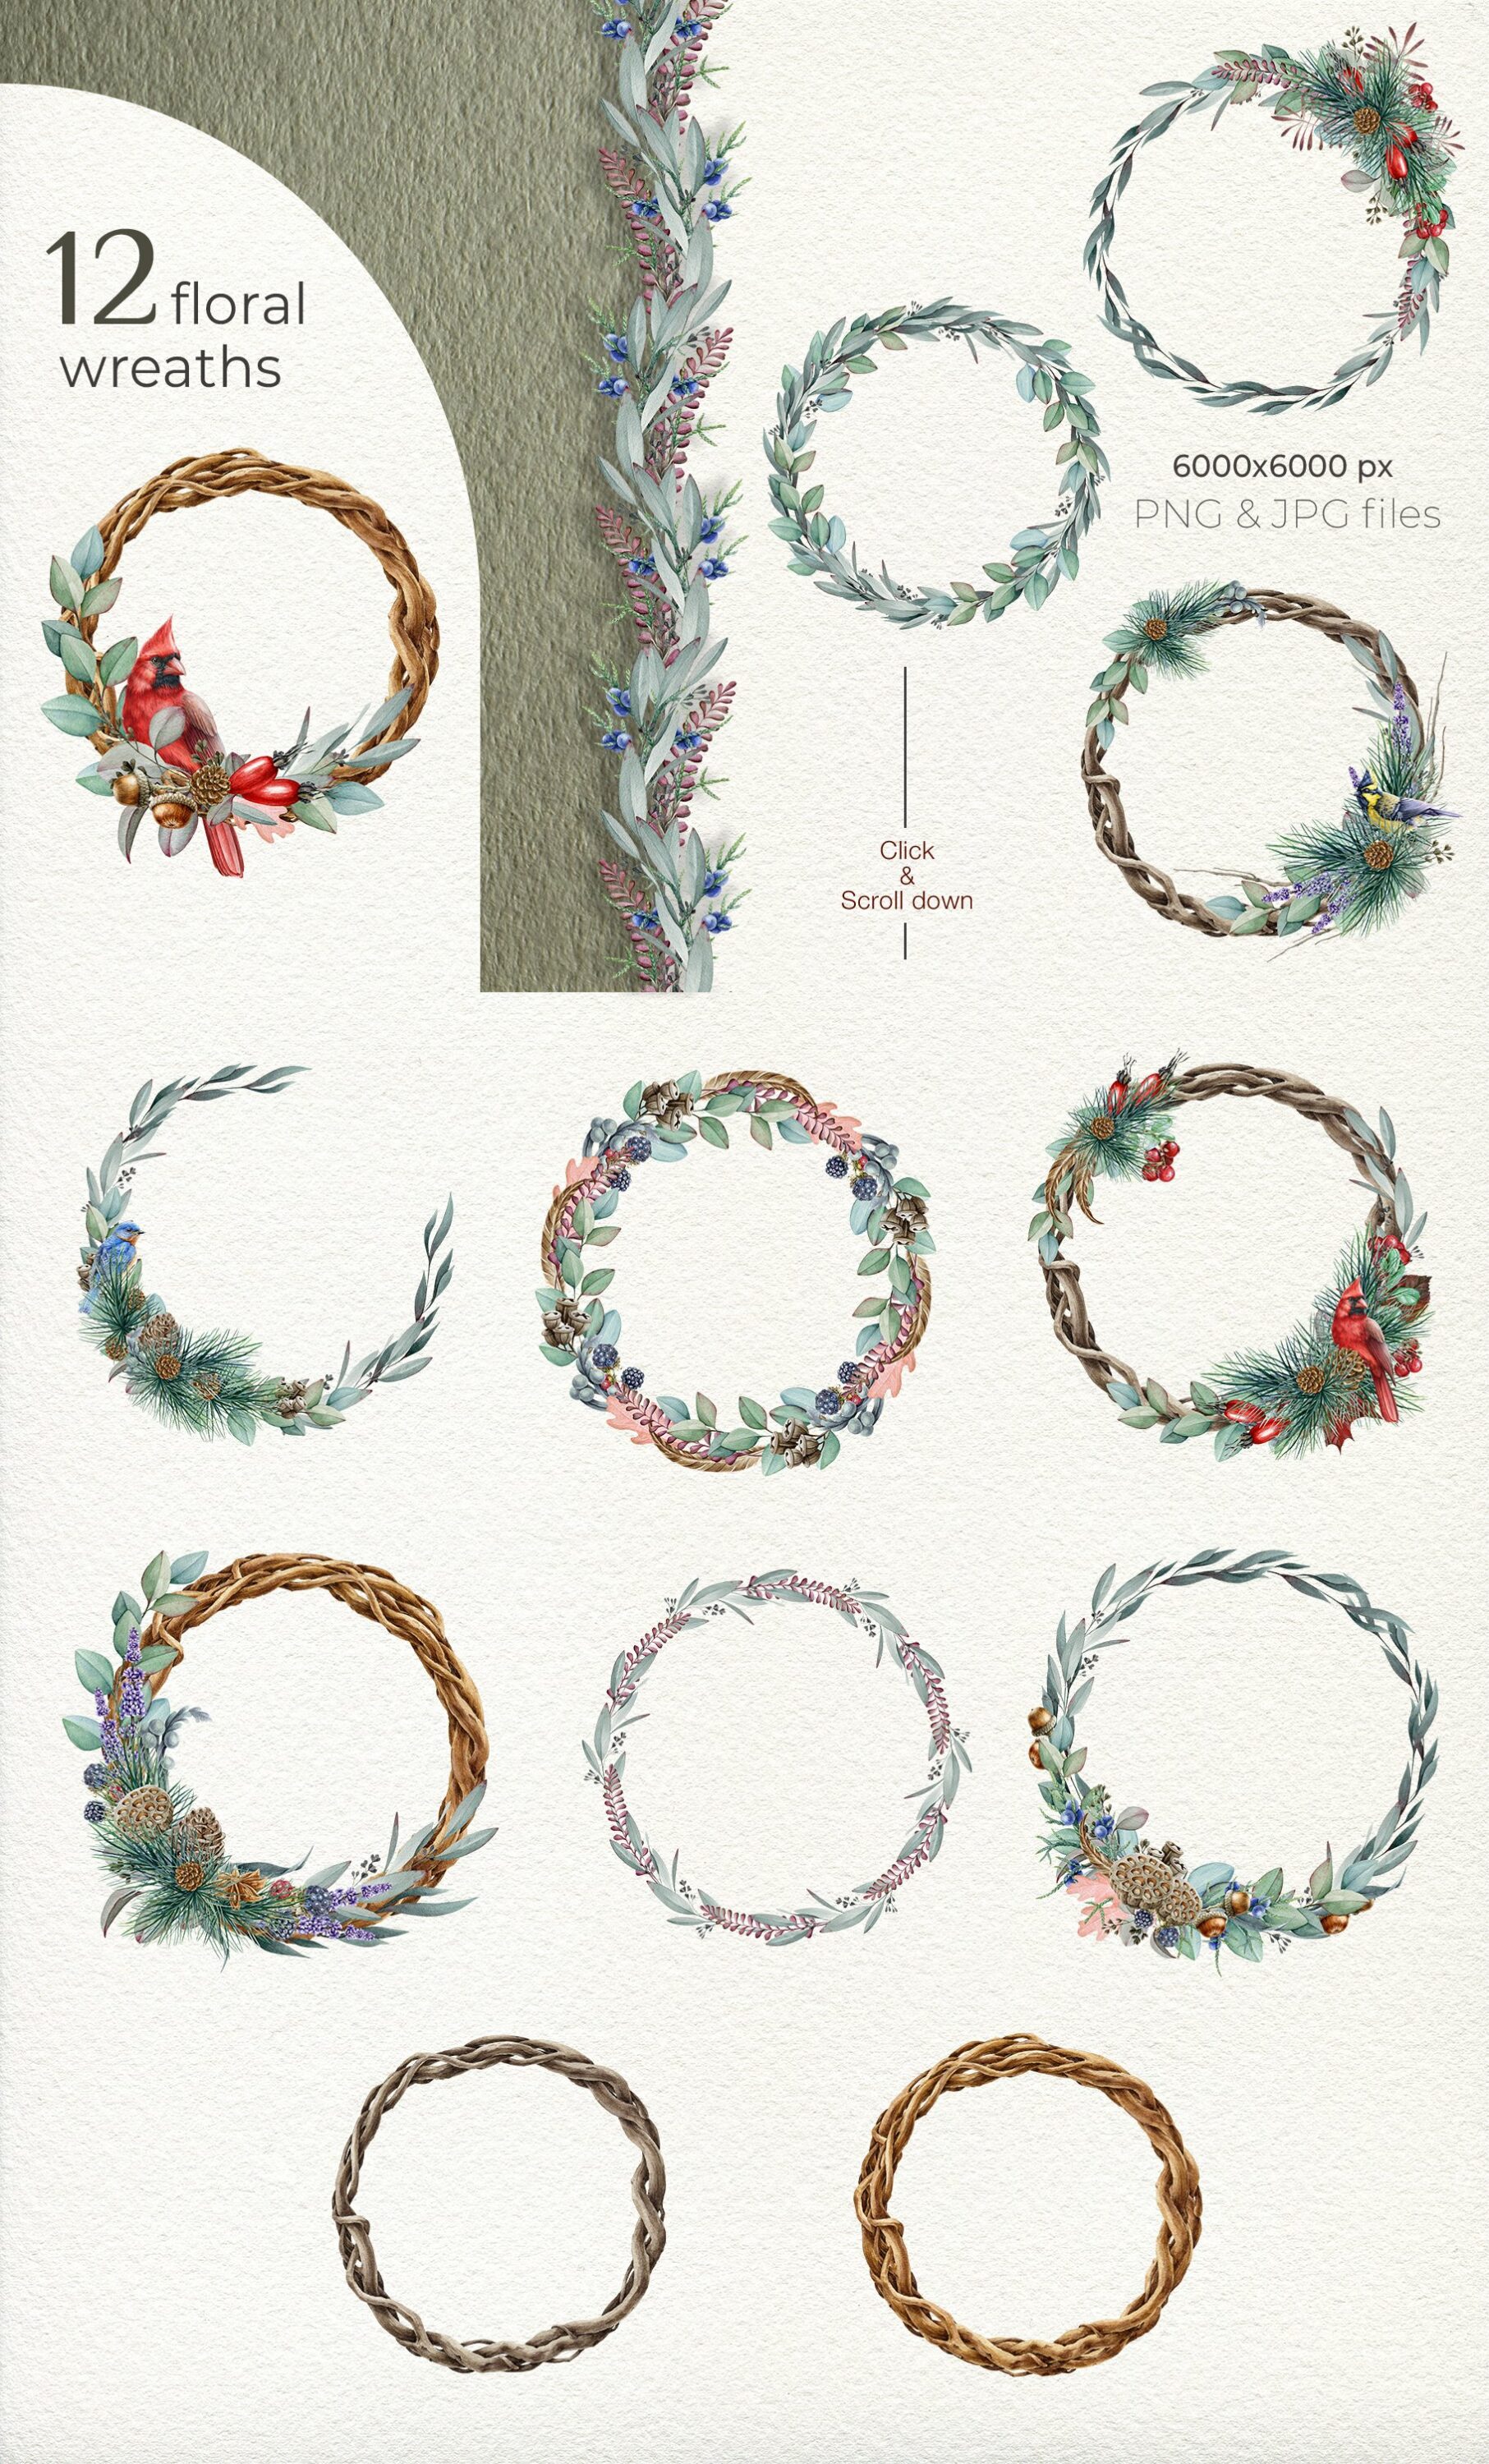 Various of winter wreathes.